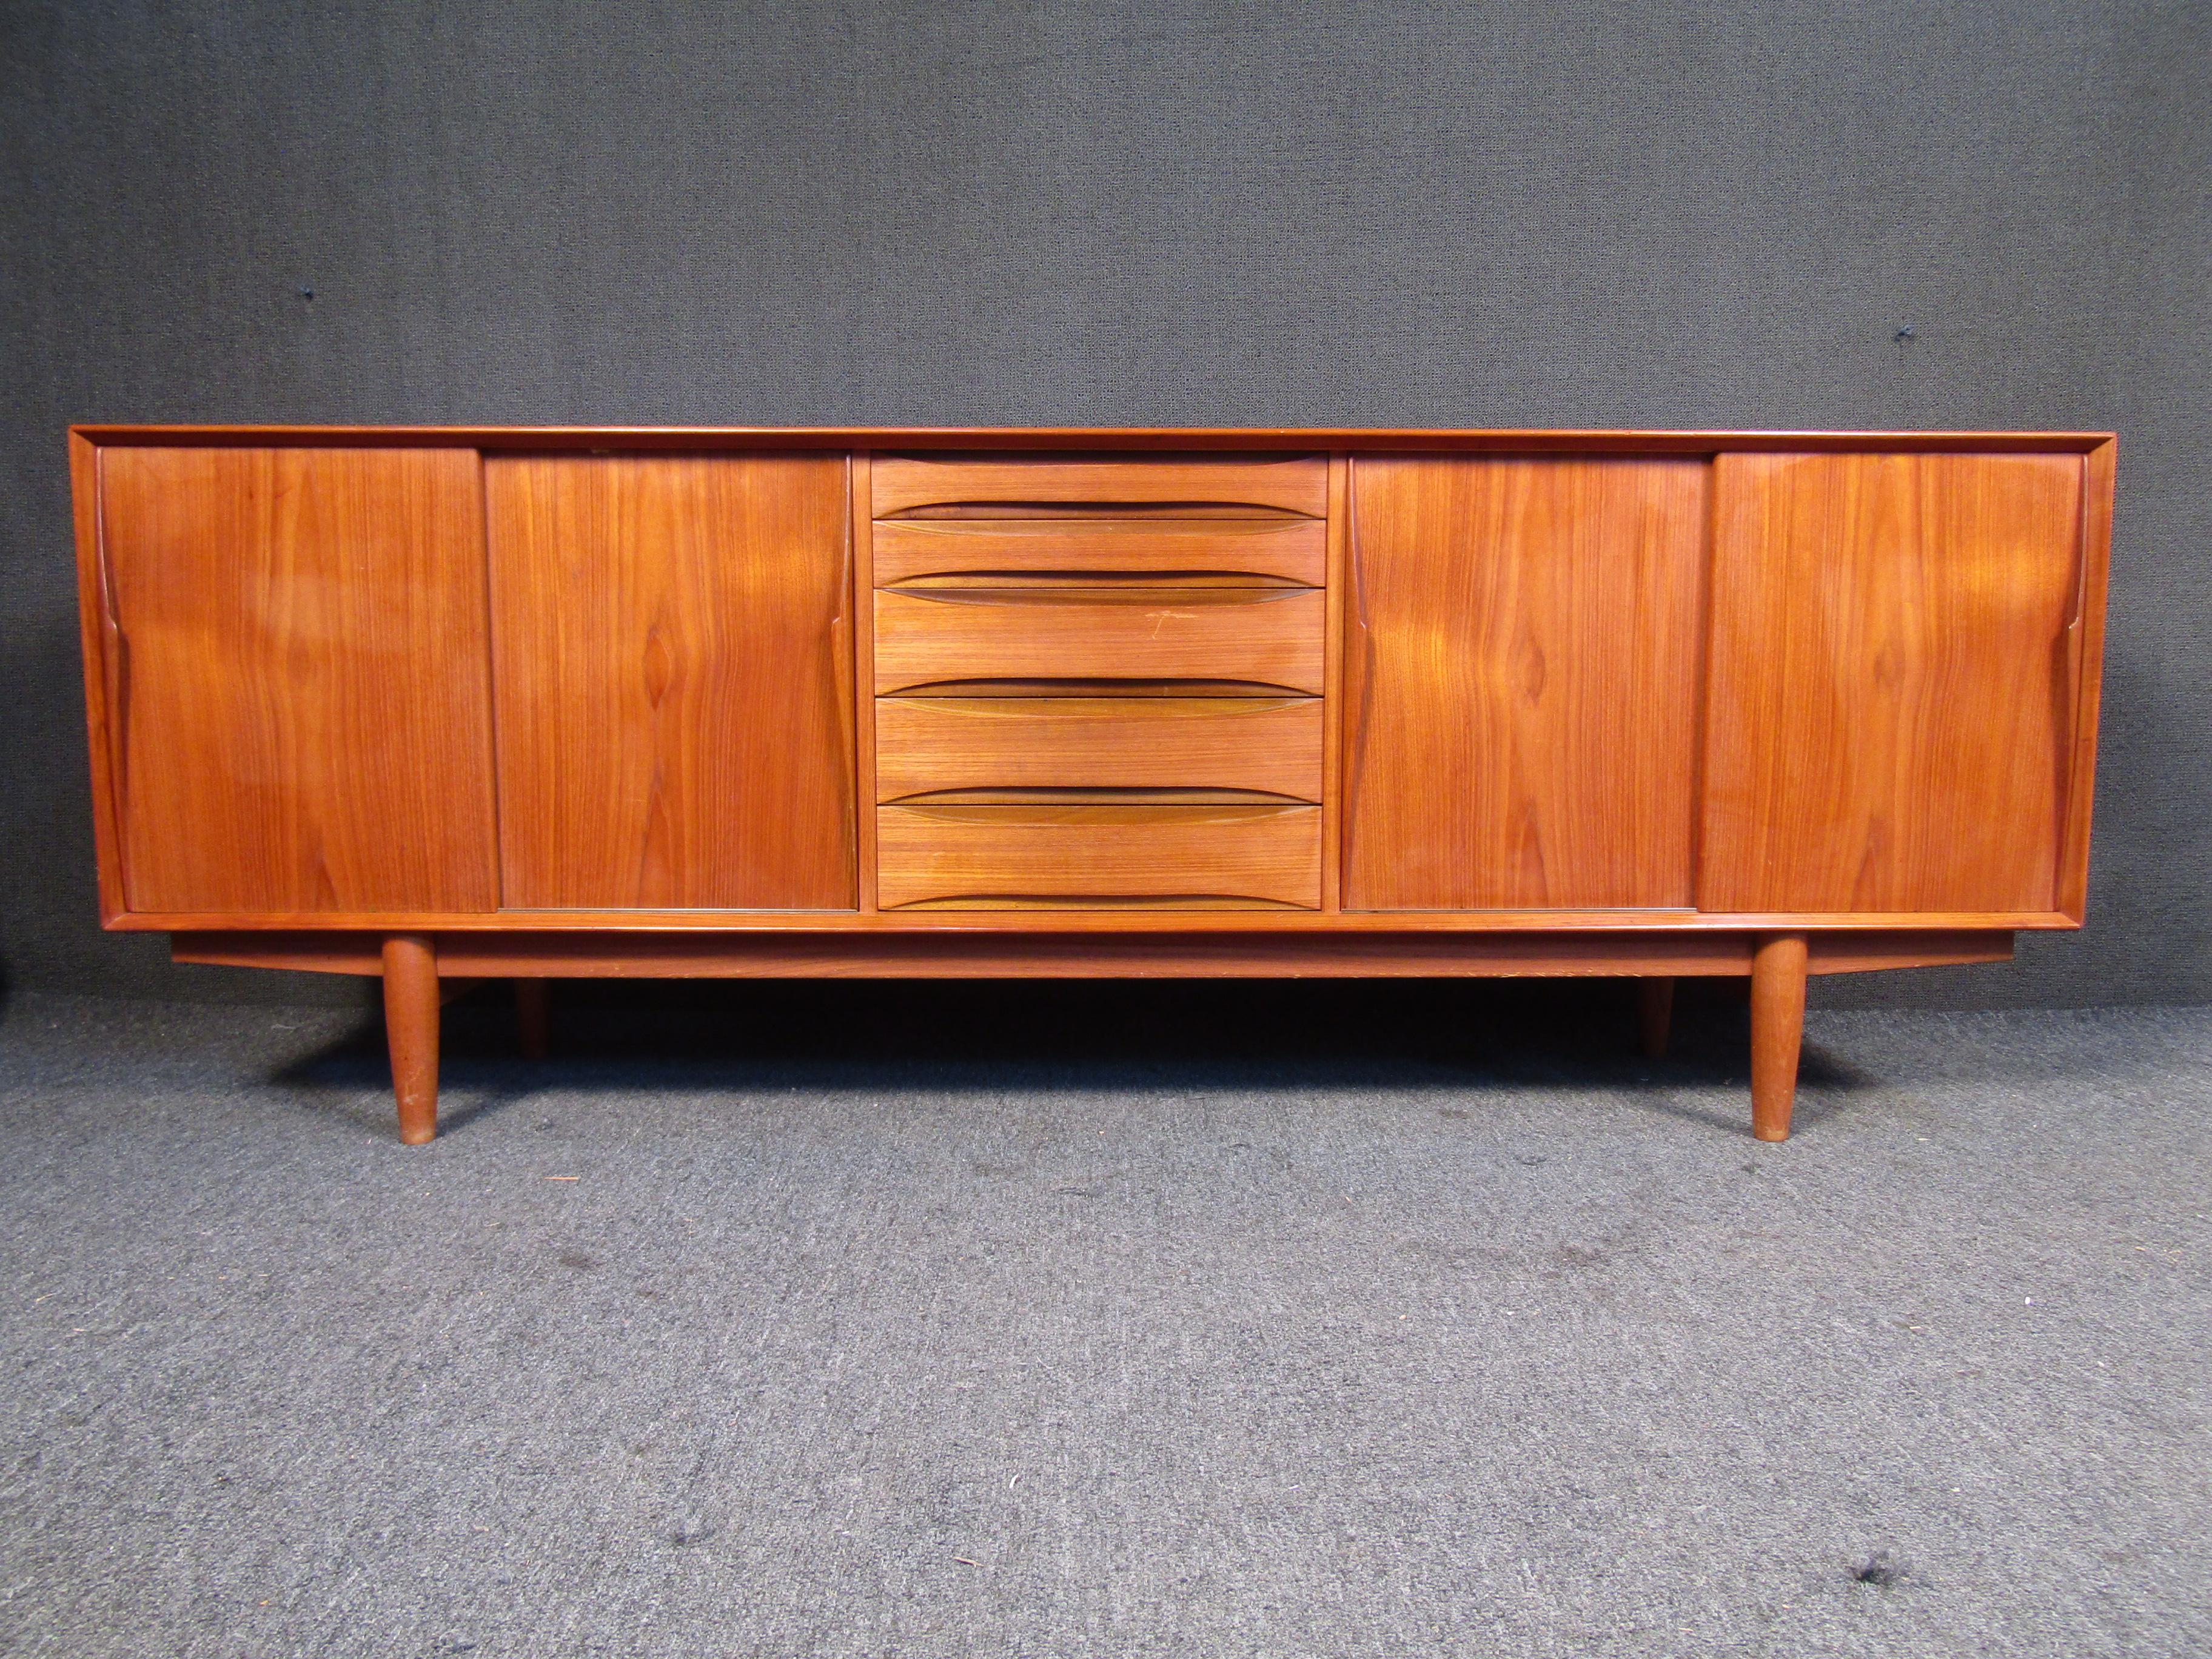 This large Mid-Century Modern credenza by Dyrlund combines quality materials like rich teak wood with a stylish vintage design and Danish craftsmanship. This unusually wide piece offers extra storage for any room or office in a timeless Mid-Century